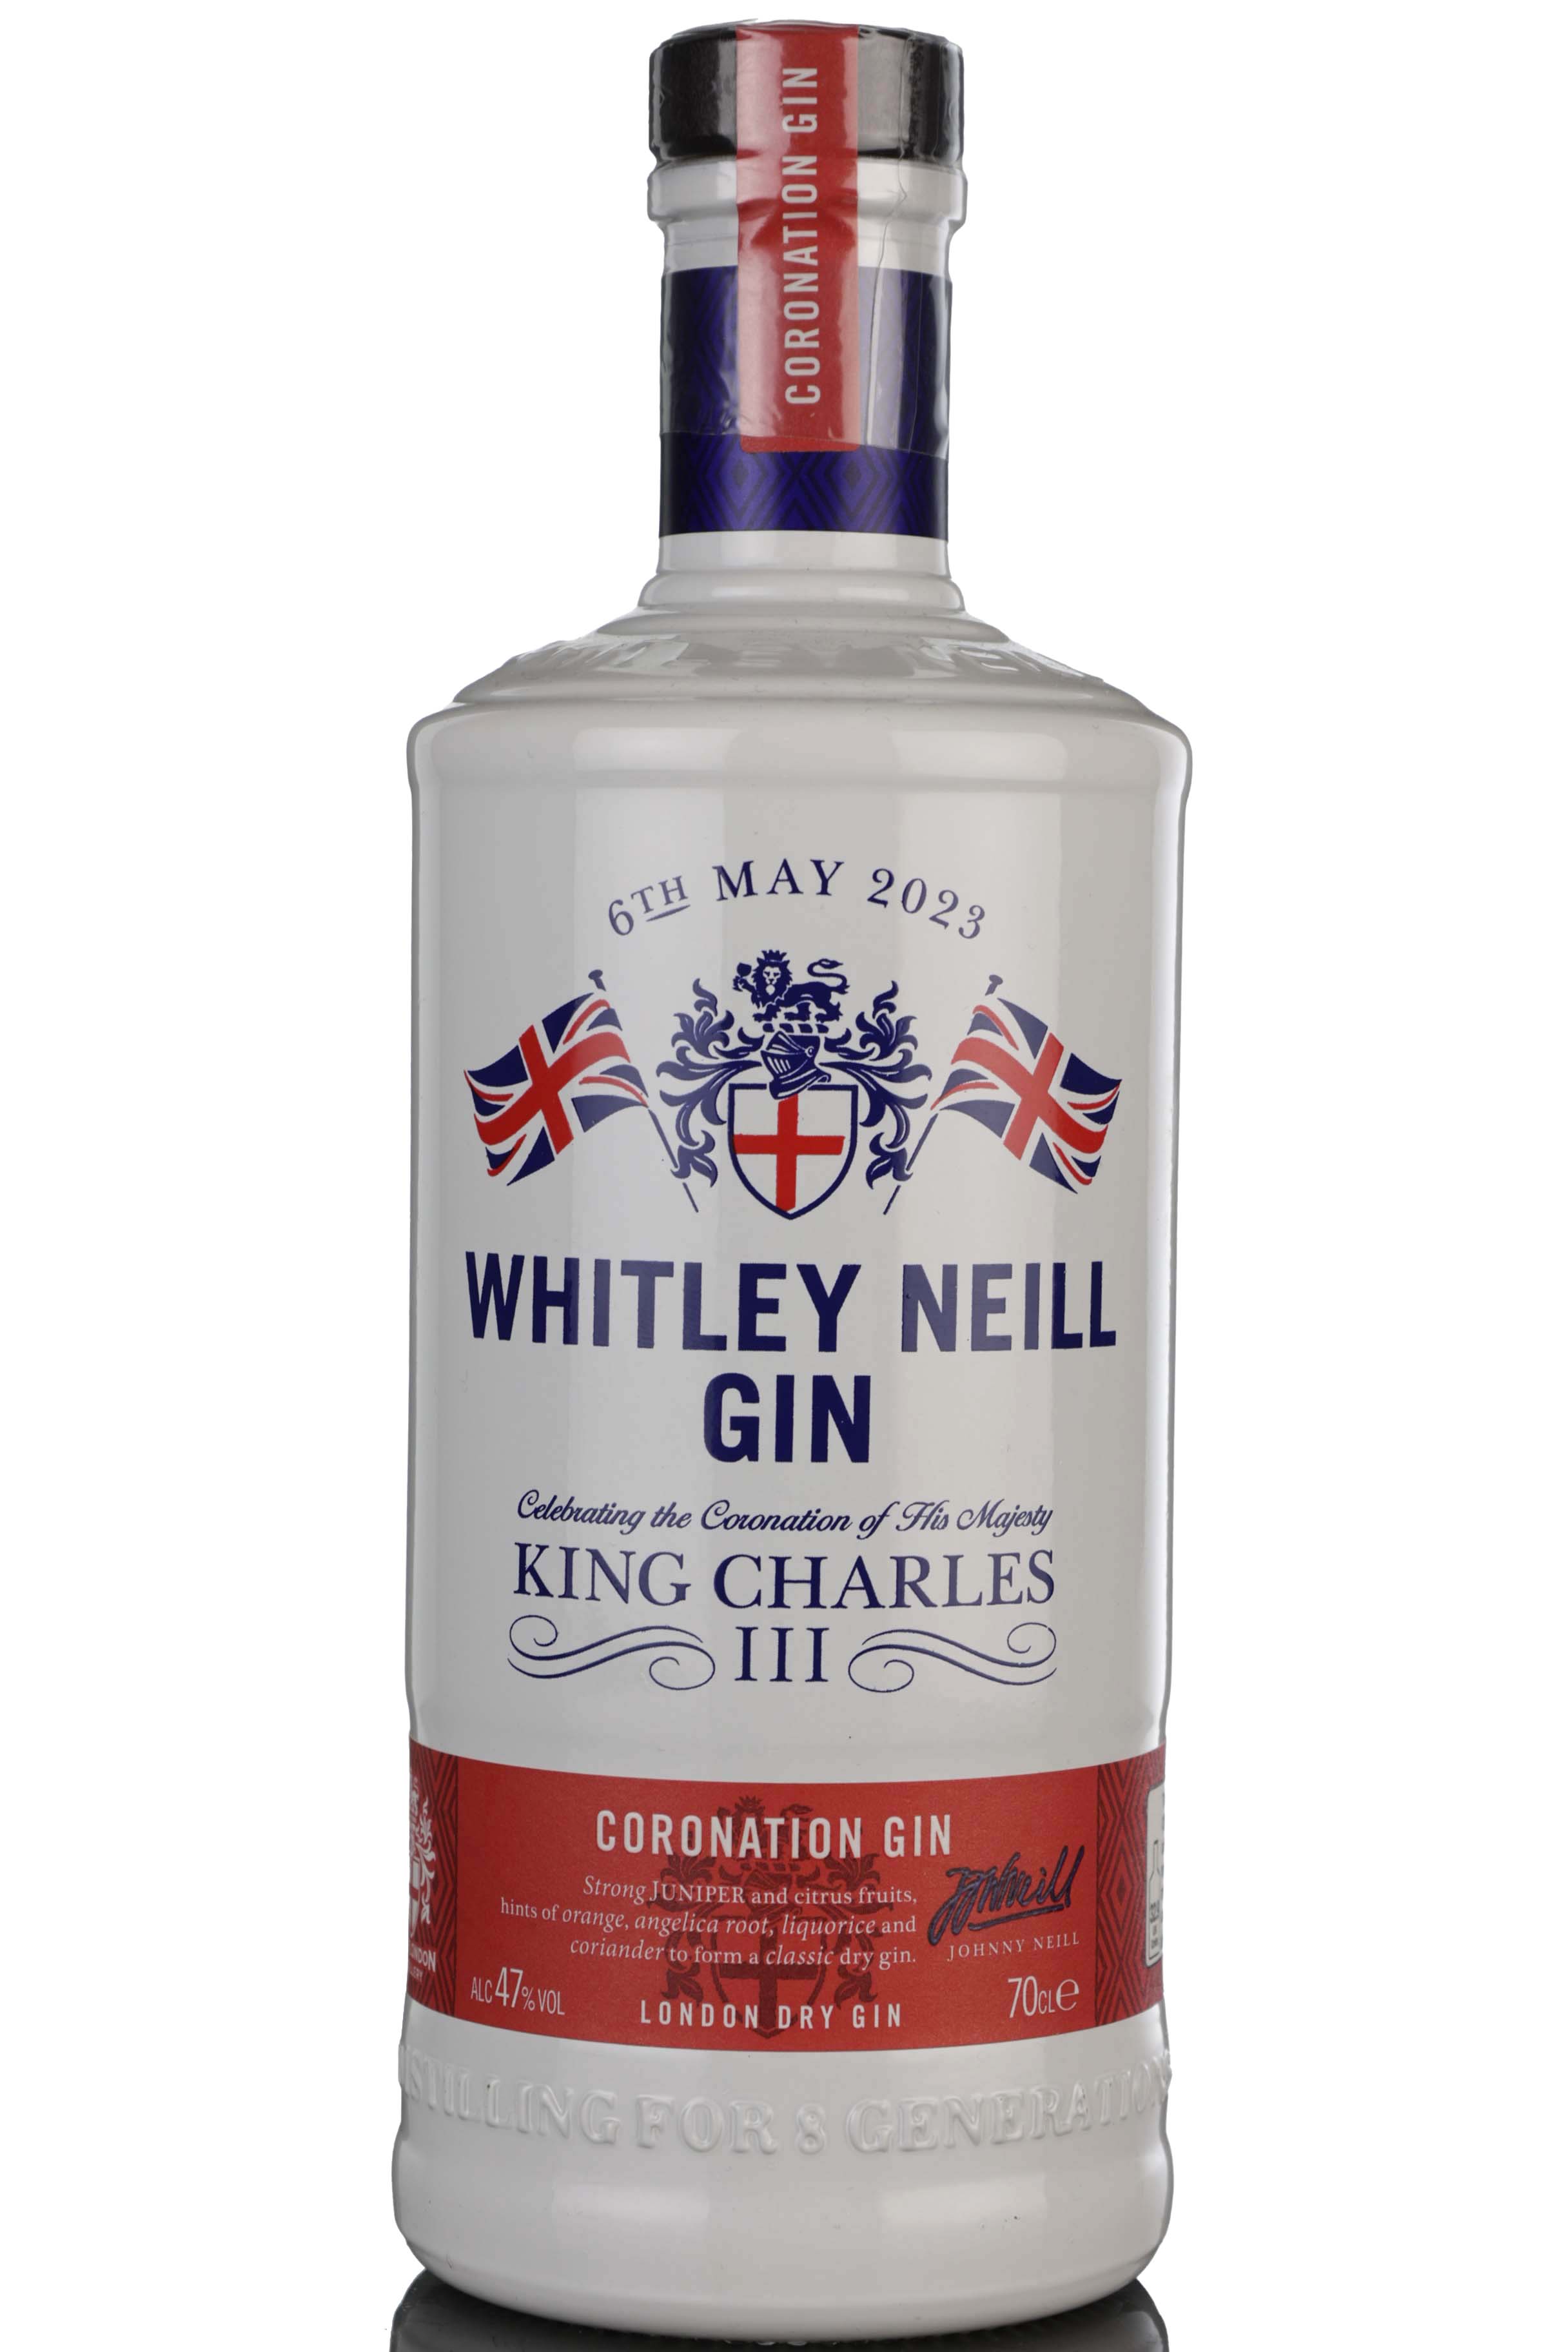 Whitley Neill Gin - Celebrating The Coronation Of King Charles III 2023